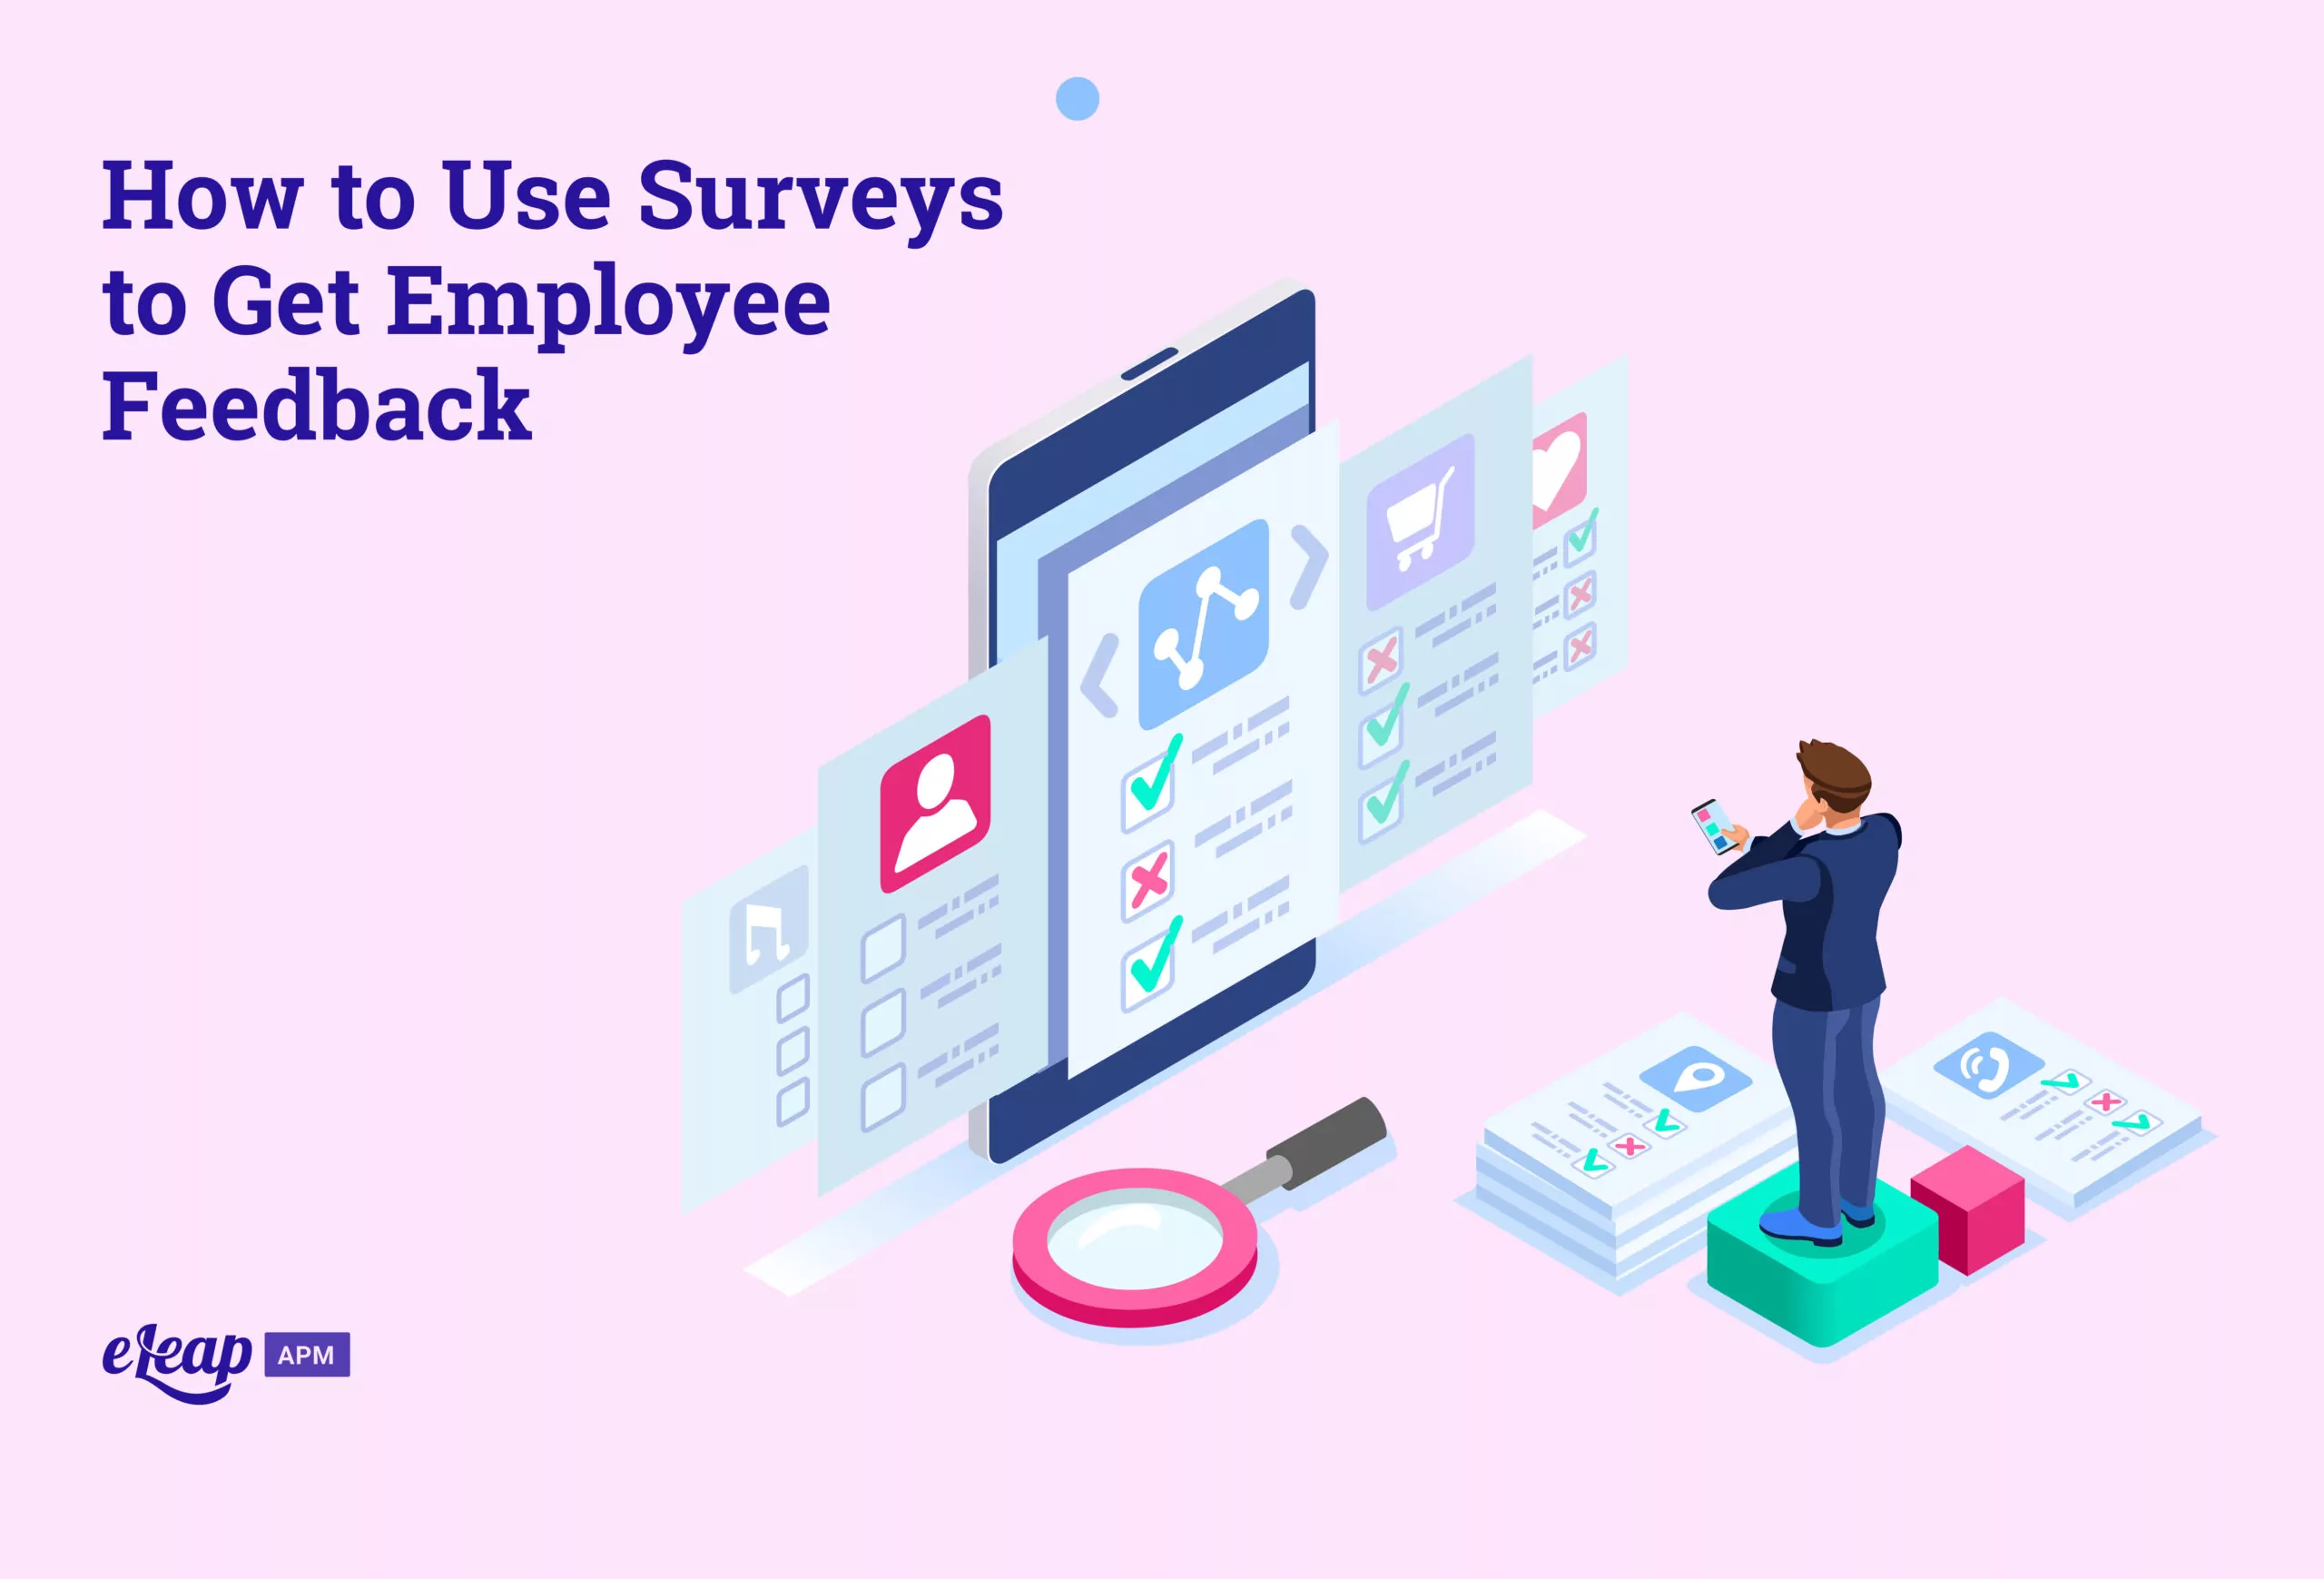 How to Use Surveys to Get Employee Feedback